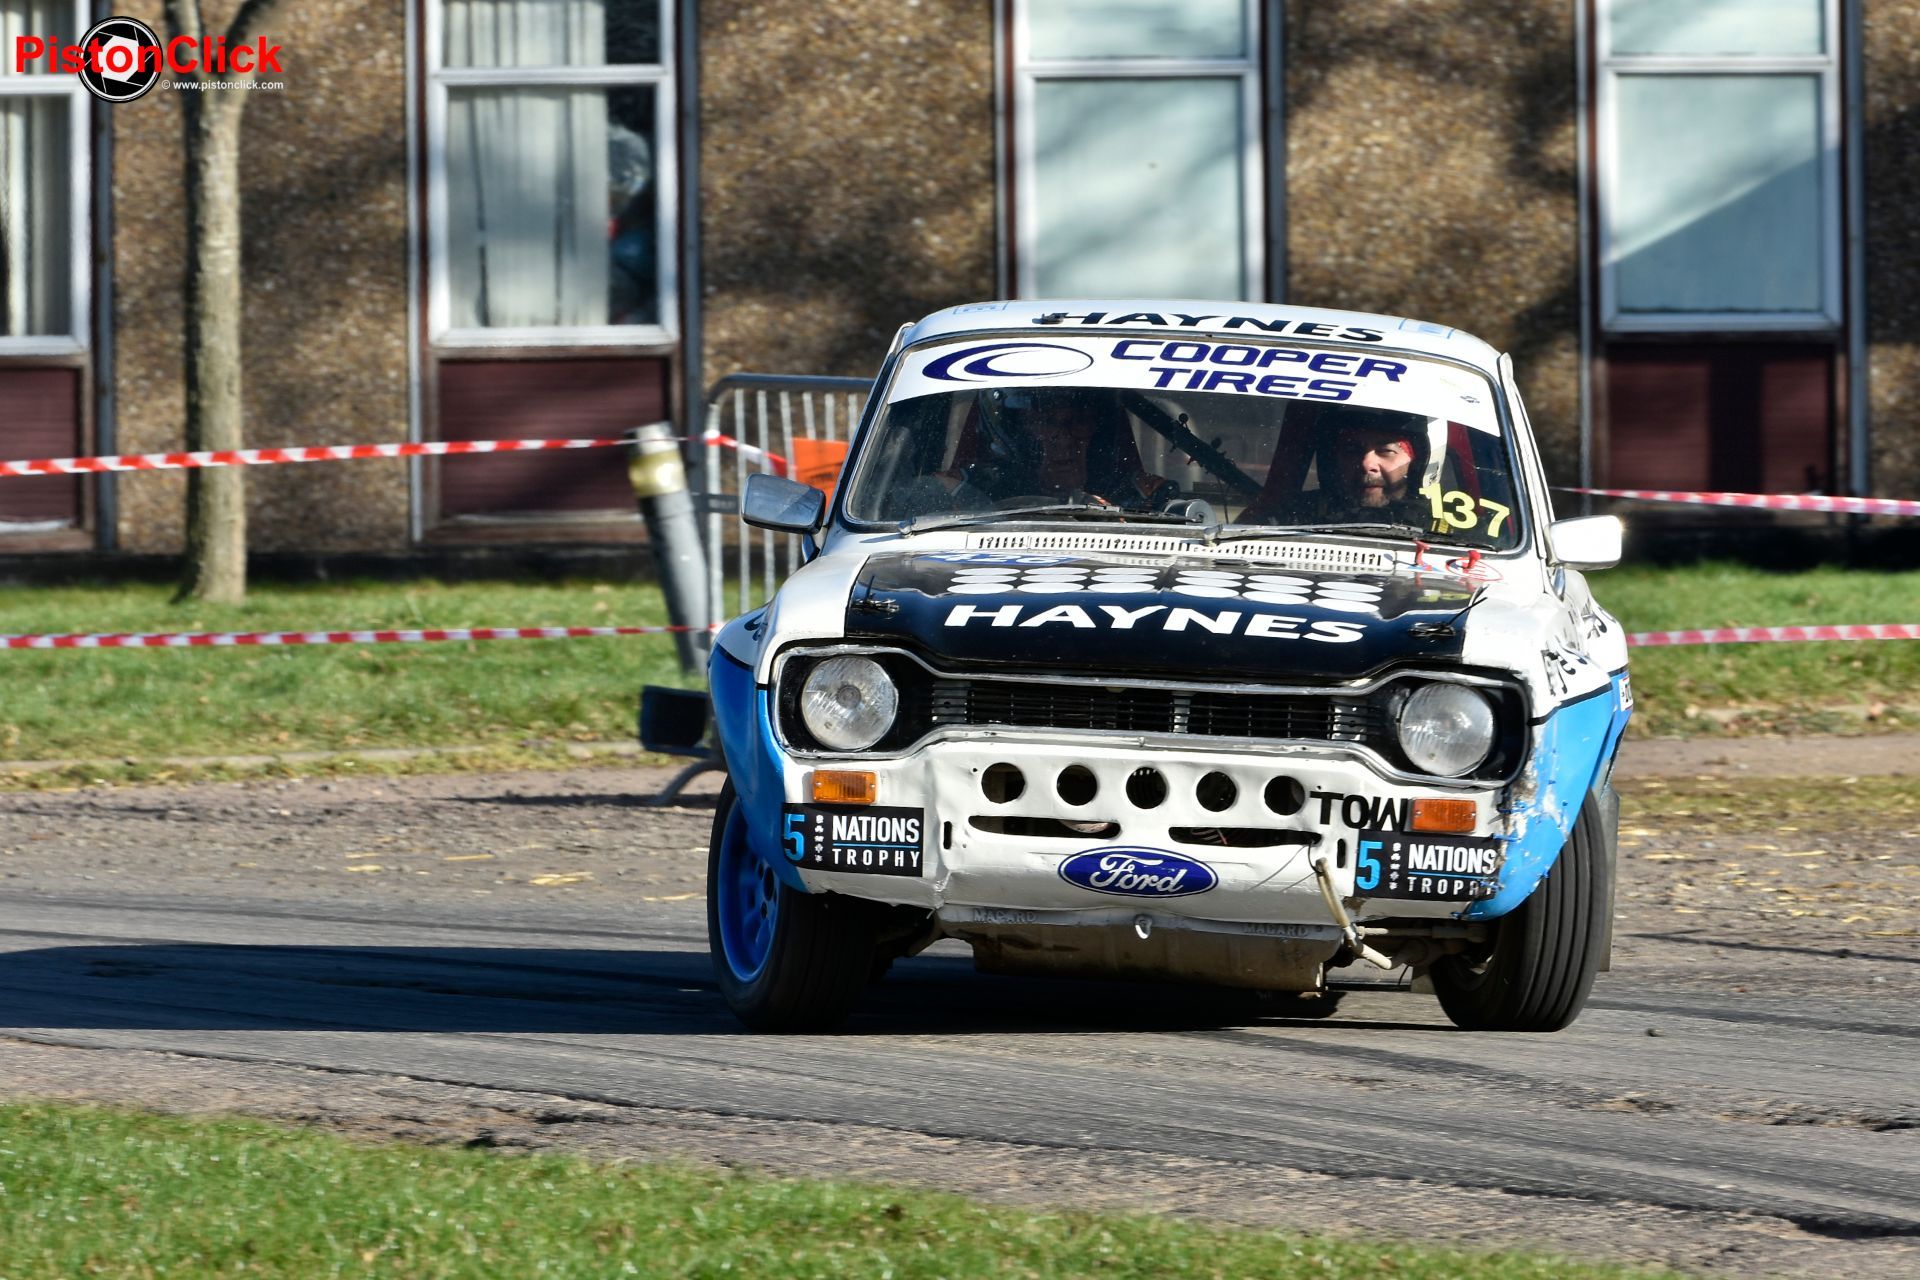 Photographing the historic rallying at Race Retro